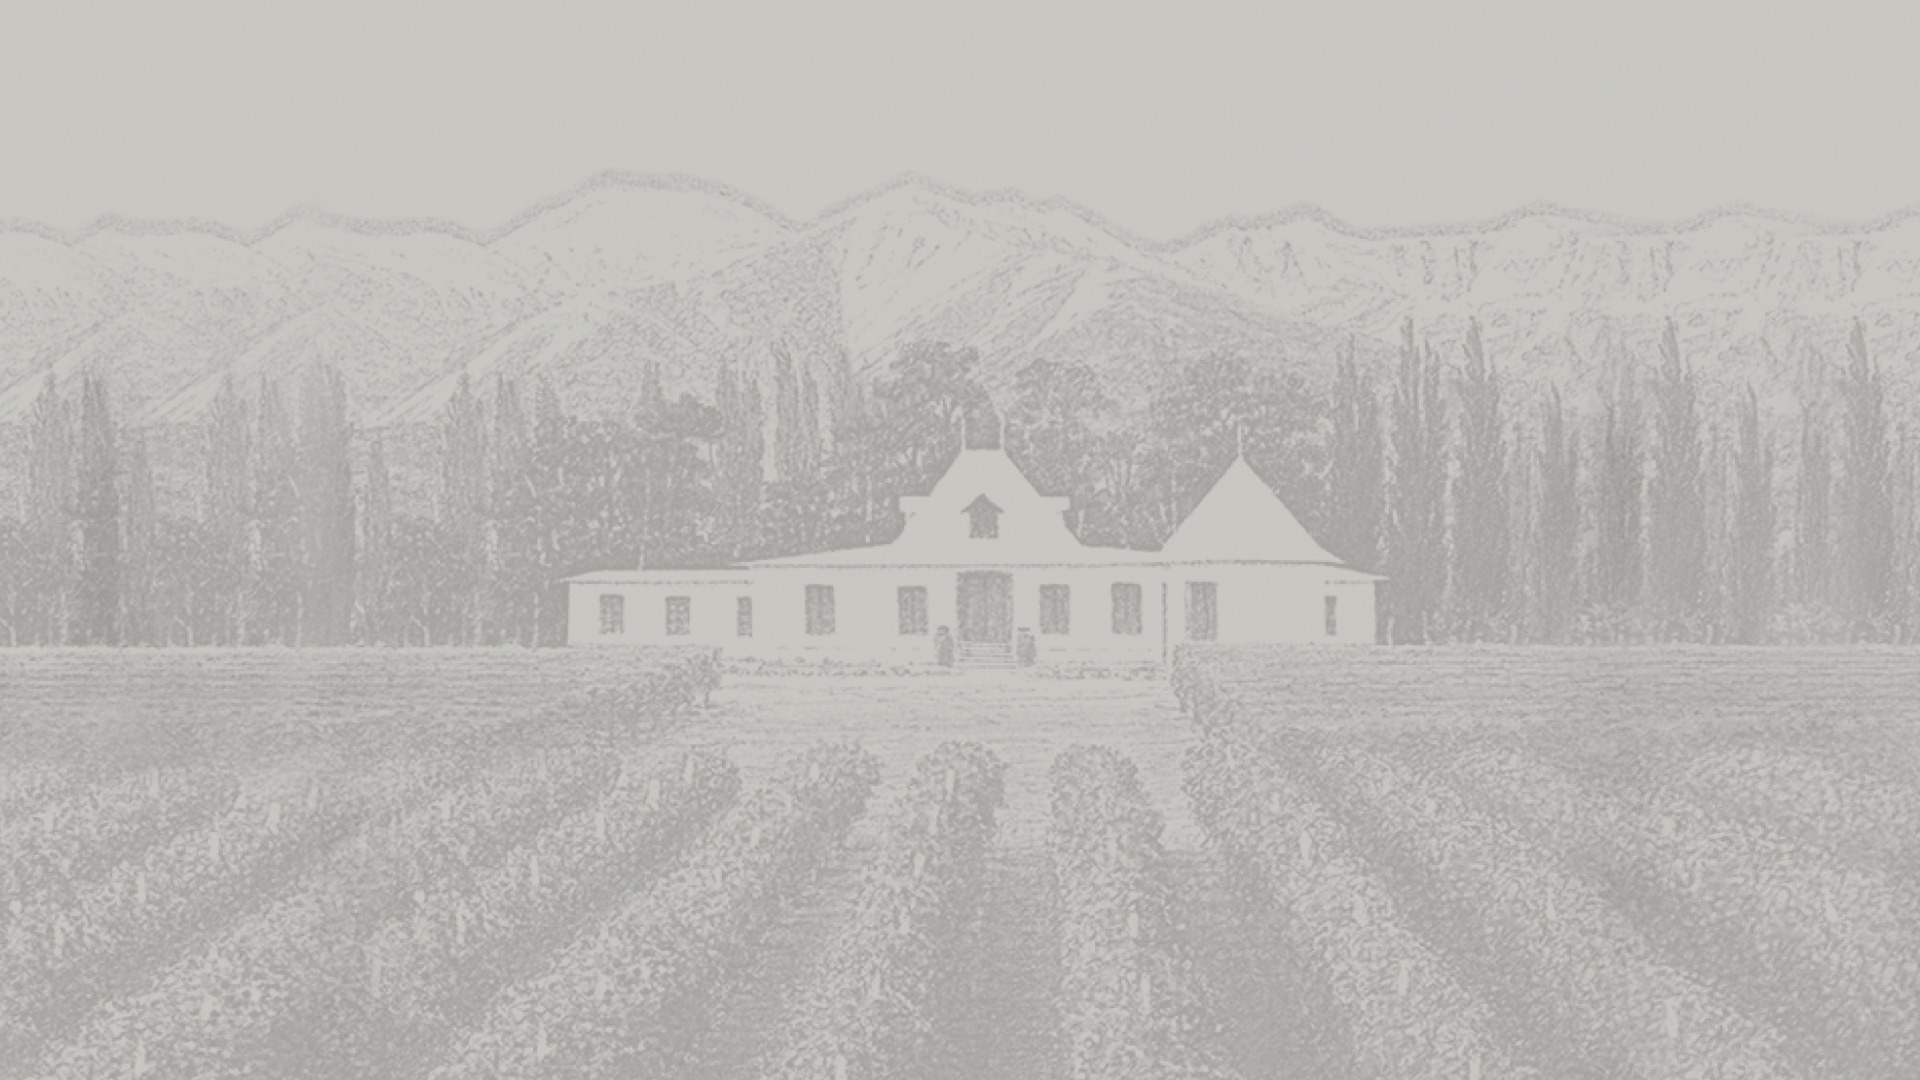 Mountains and wineyard drawing background